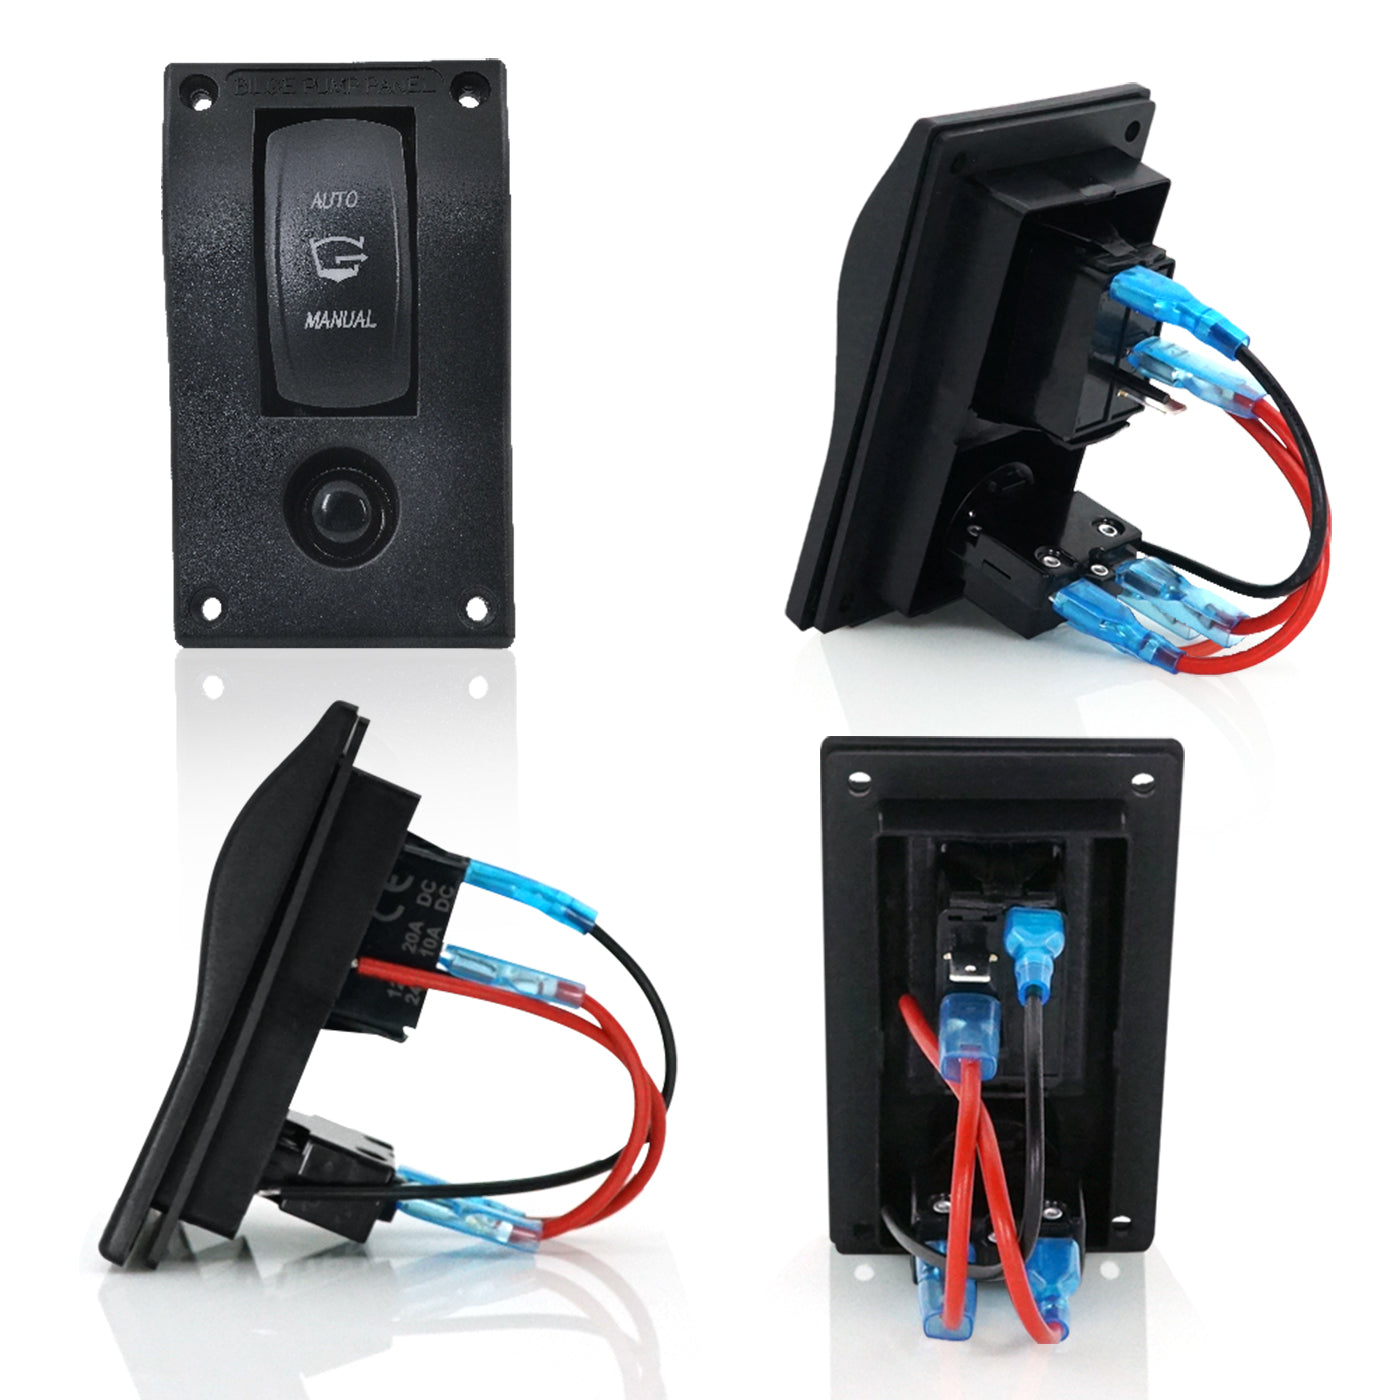 3-Position Bilge Pump Rocker Switch Panel, Automatic - Off - Manual Three Positions to Control The Pumps, DC 12v 24v with 10A Fuse Circuit Breaker, Auto/Hand-Driven with LED Indicator for Boat Ship